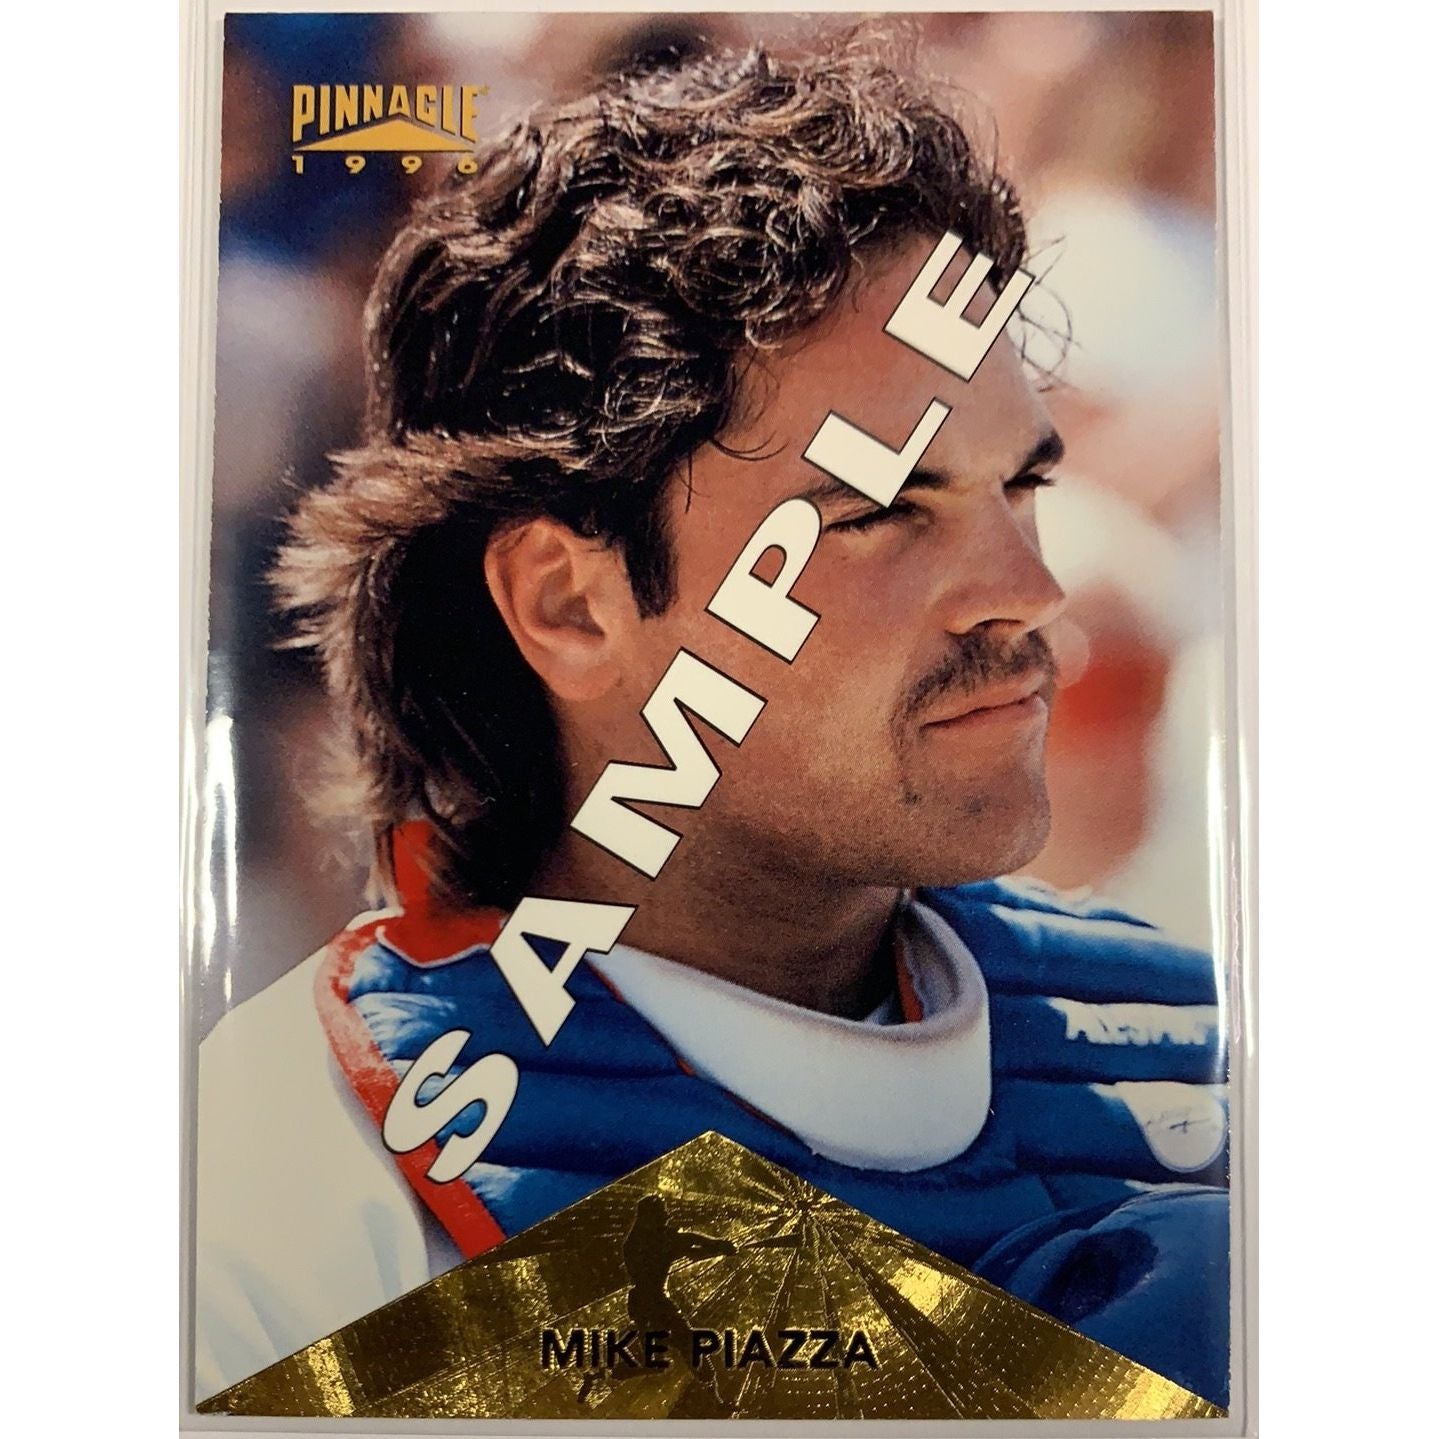  1996 Pinnacle Mike Piazza Promo Sample Card  Local Legends Cards & Collectibles